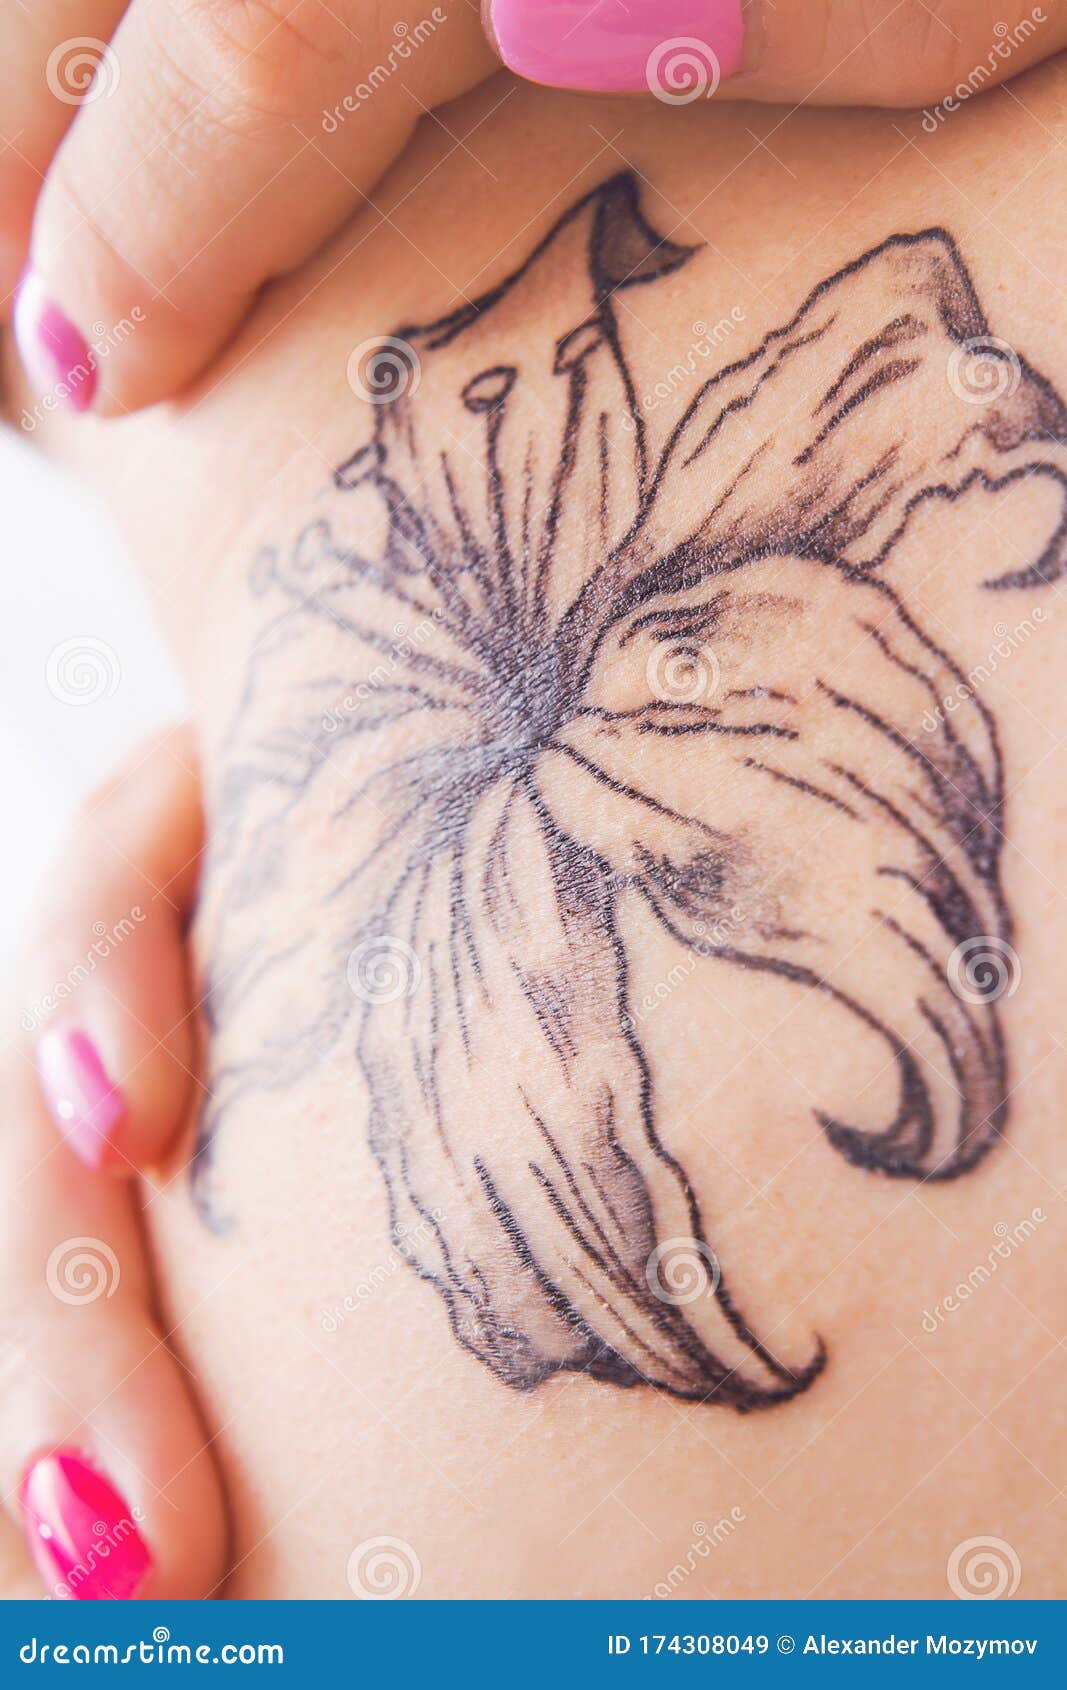 Lily Flower Tattoo Close Up Female Black And White Tattoo Editorial Stock Image Image Of Lady Girl 174308049